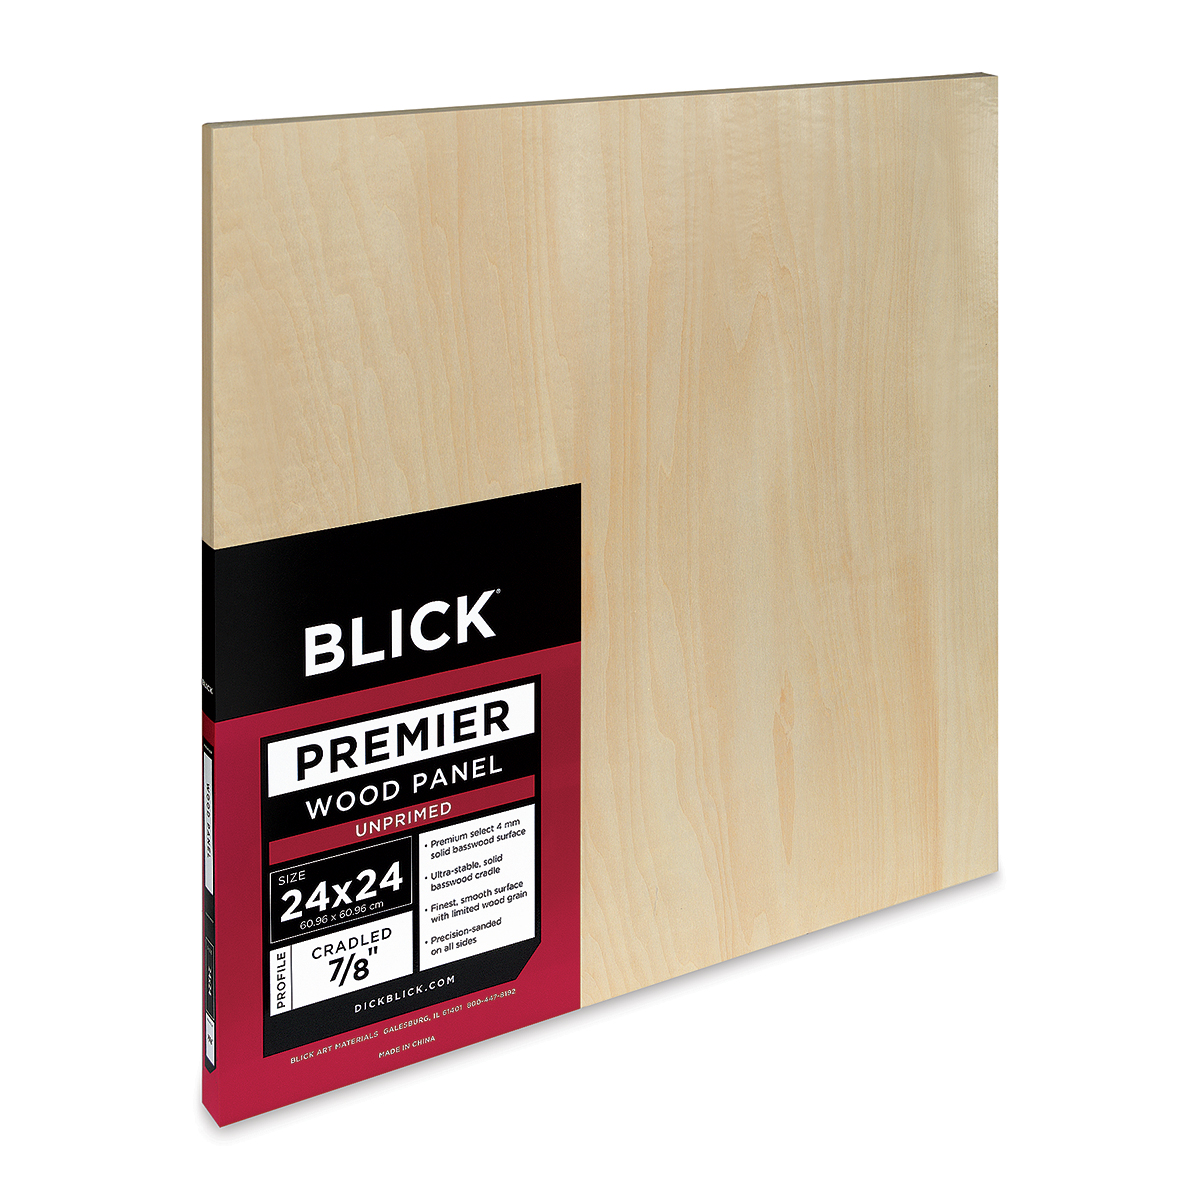 Art Boards Art Supply makes Archival Artist Panels with Archival Natural  Maple wood painting surfaces for making art.